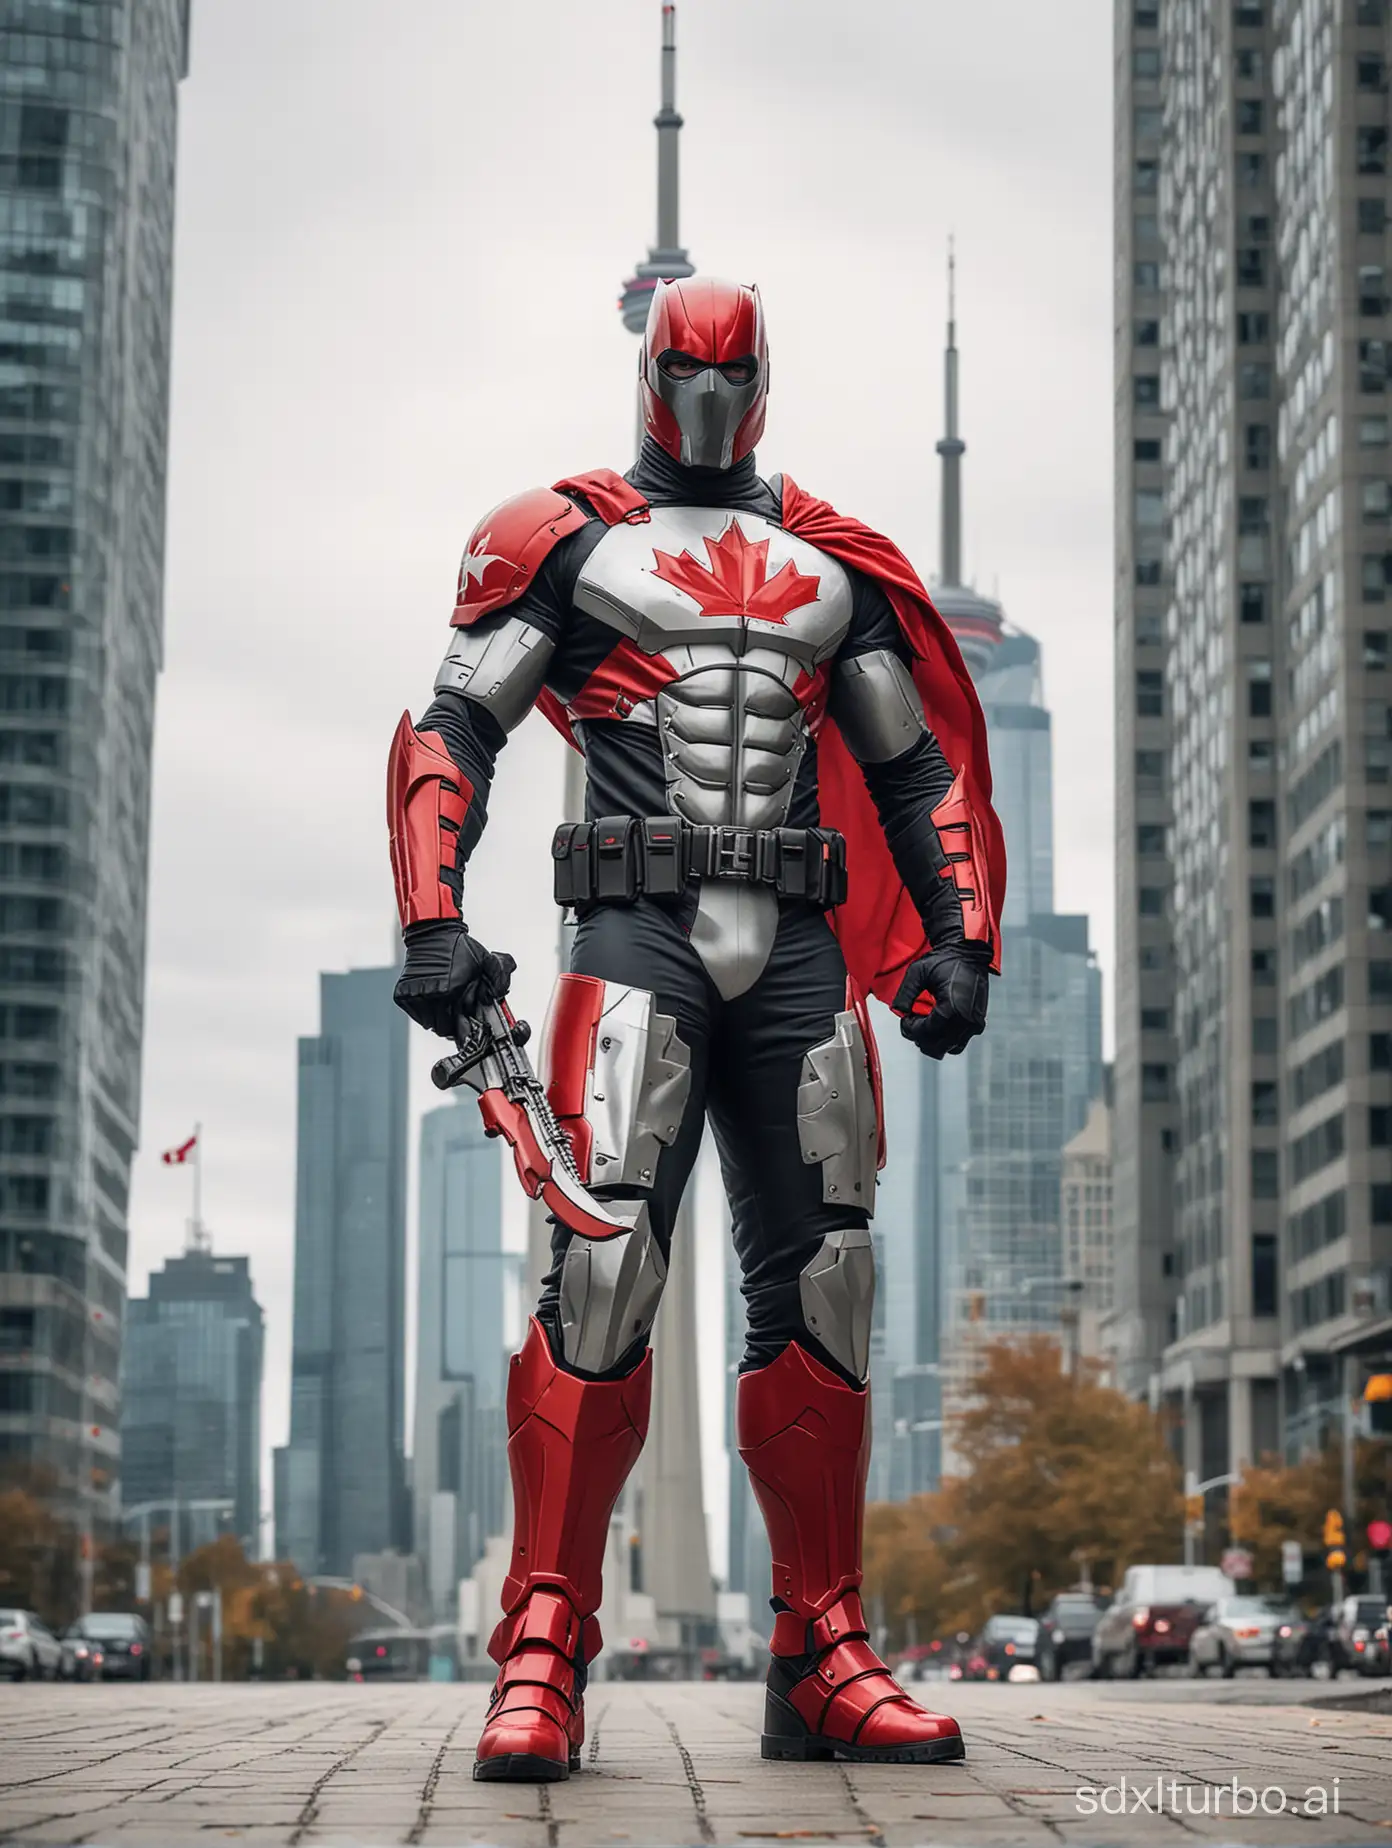 Canadian-Superhero-in-FlagColored-Armor-Stands-Proudly-Outside-CN-Tower